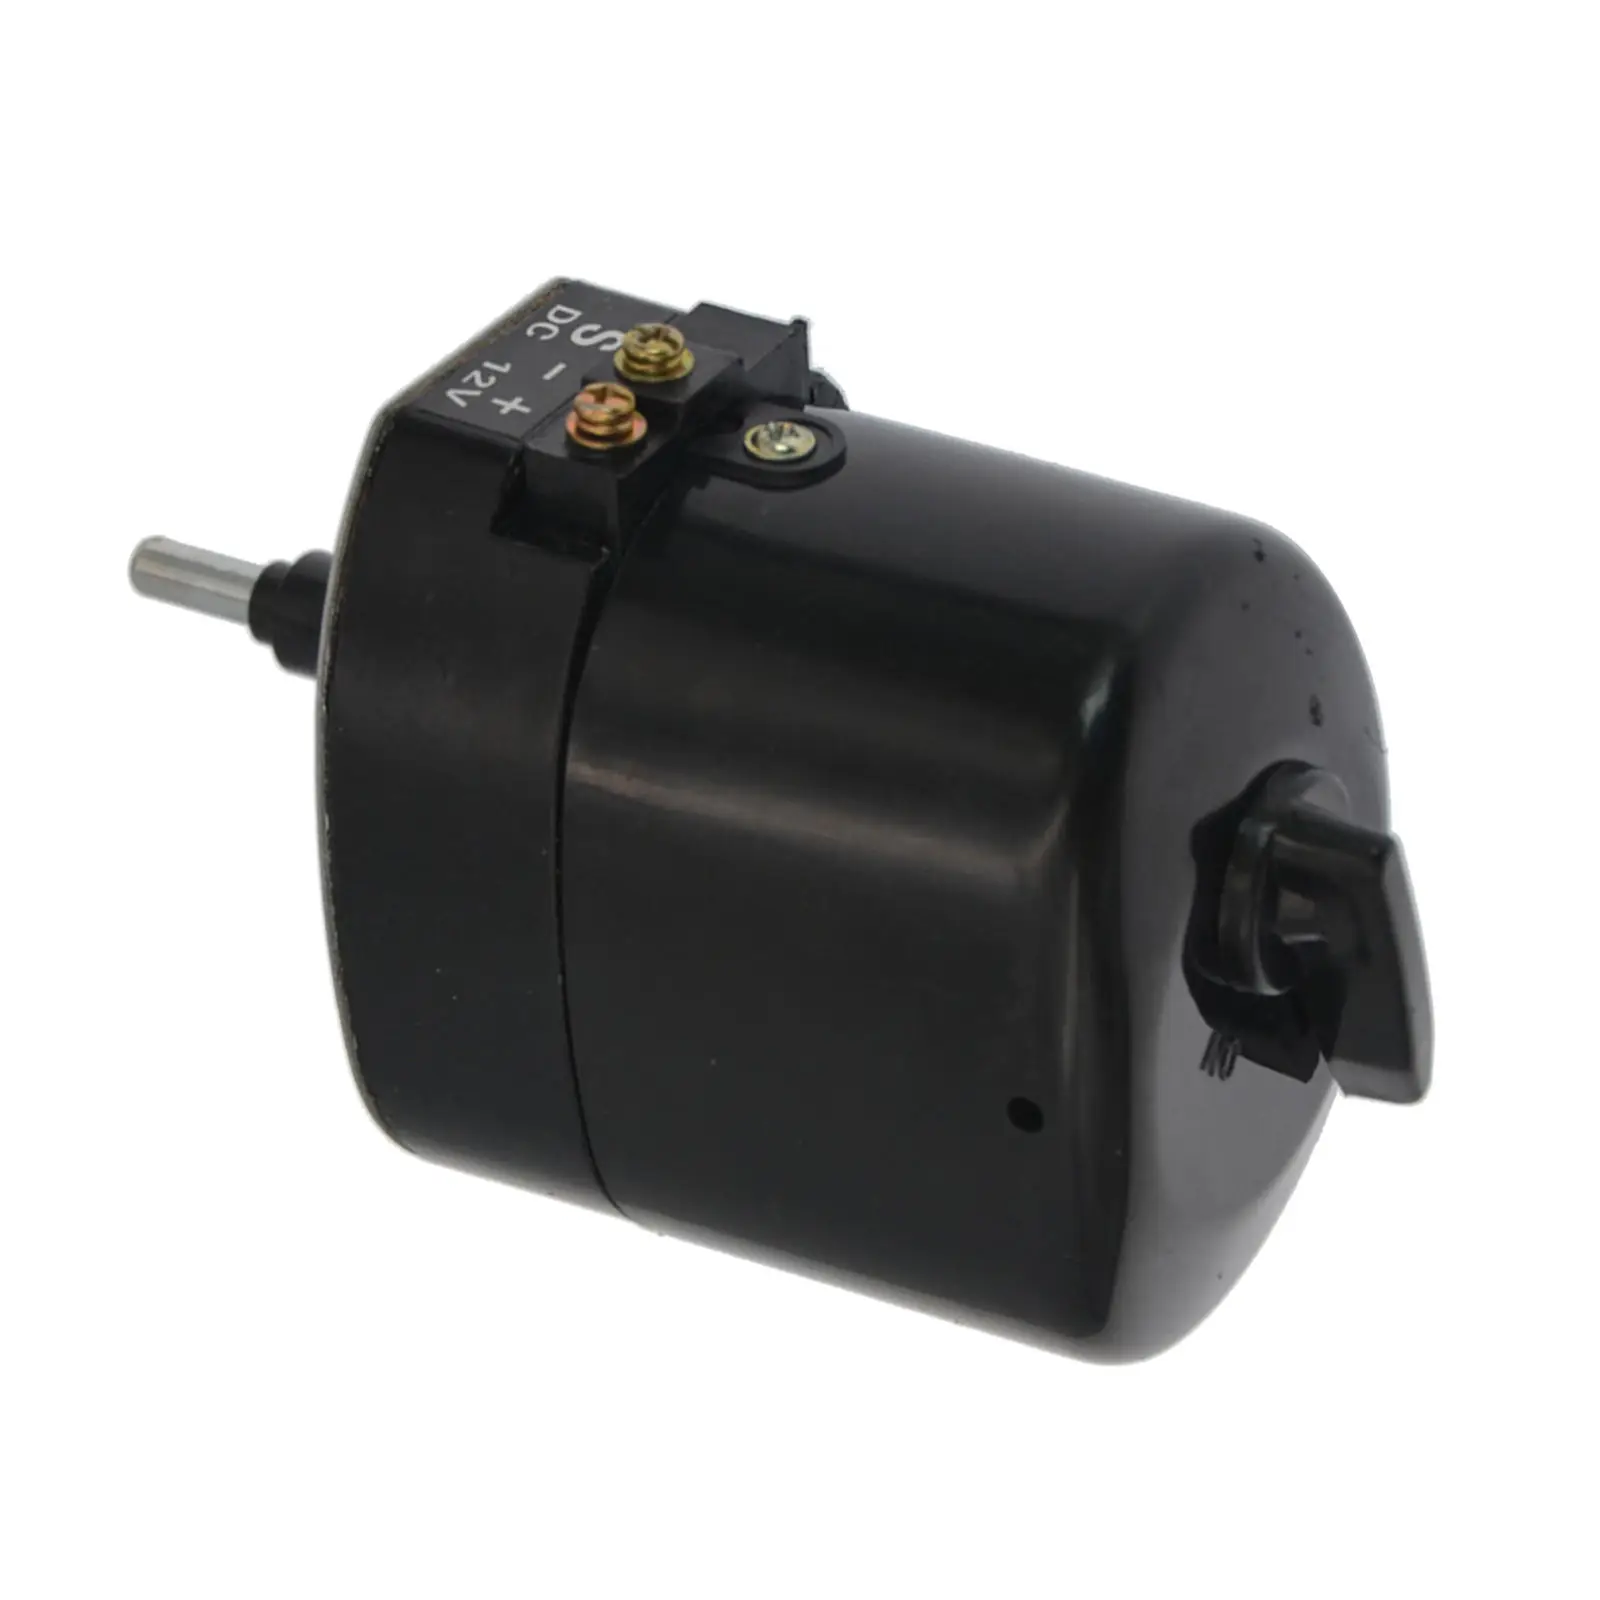 12V Wiper Motor,Car Windscreen Wiper Motor Fit For Willys Jeep Tractor 01287358 7731000001 